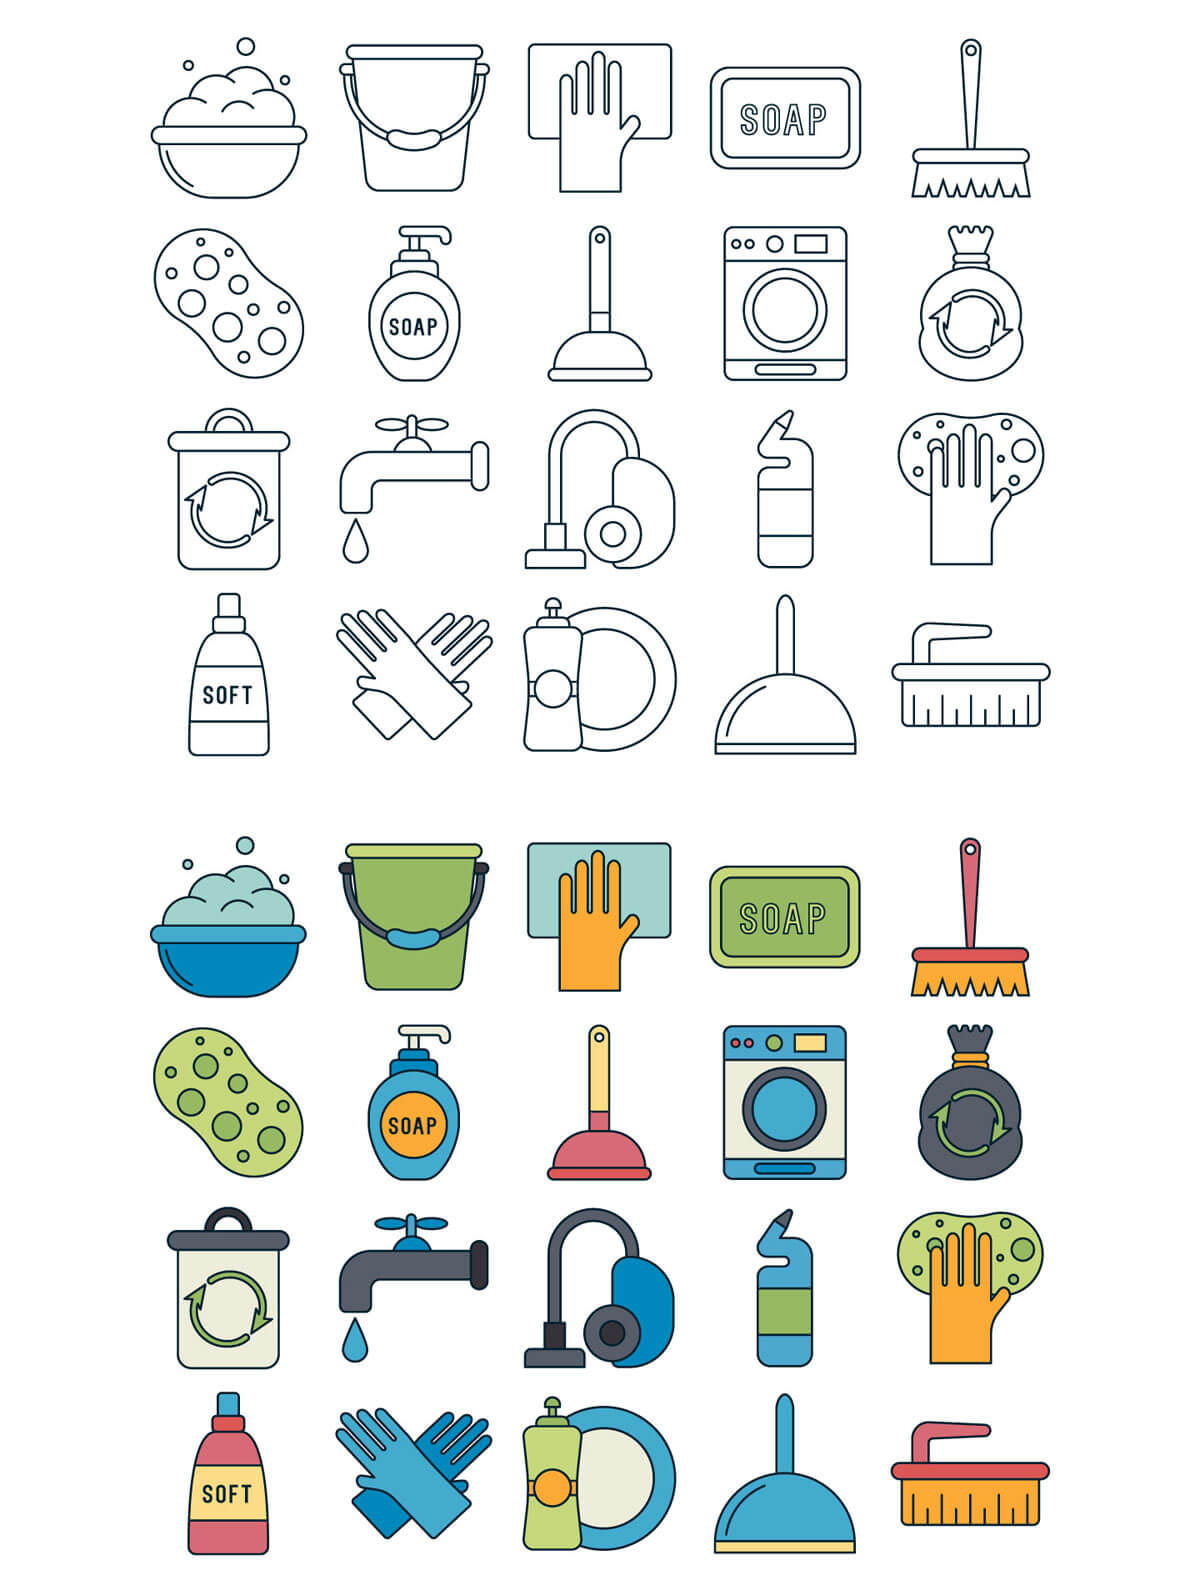 Free Cleaning Vector Icon Set